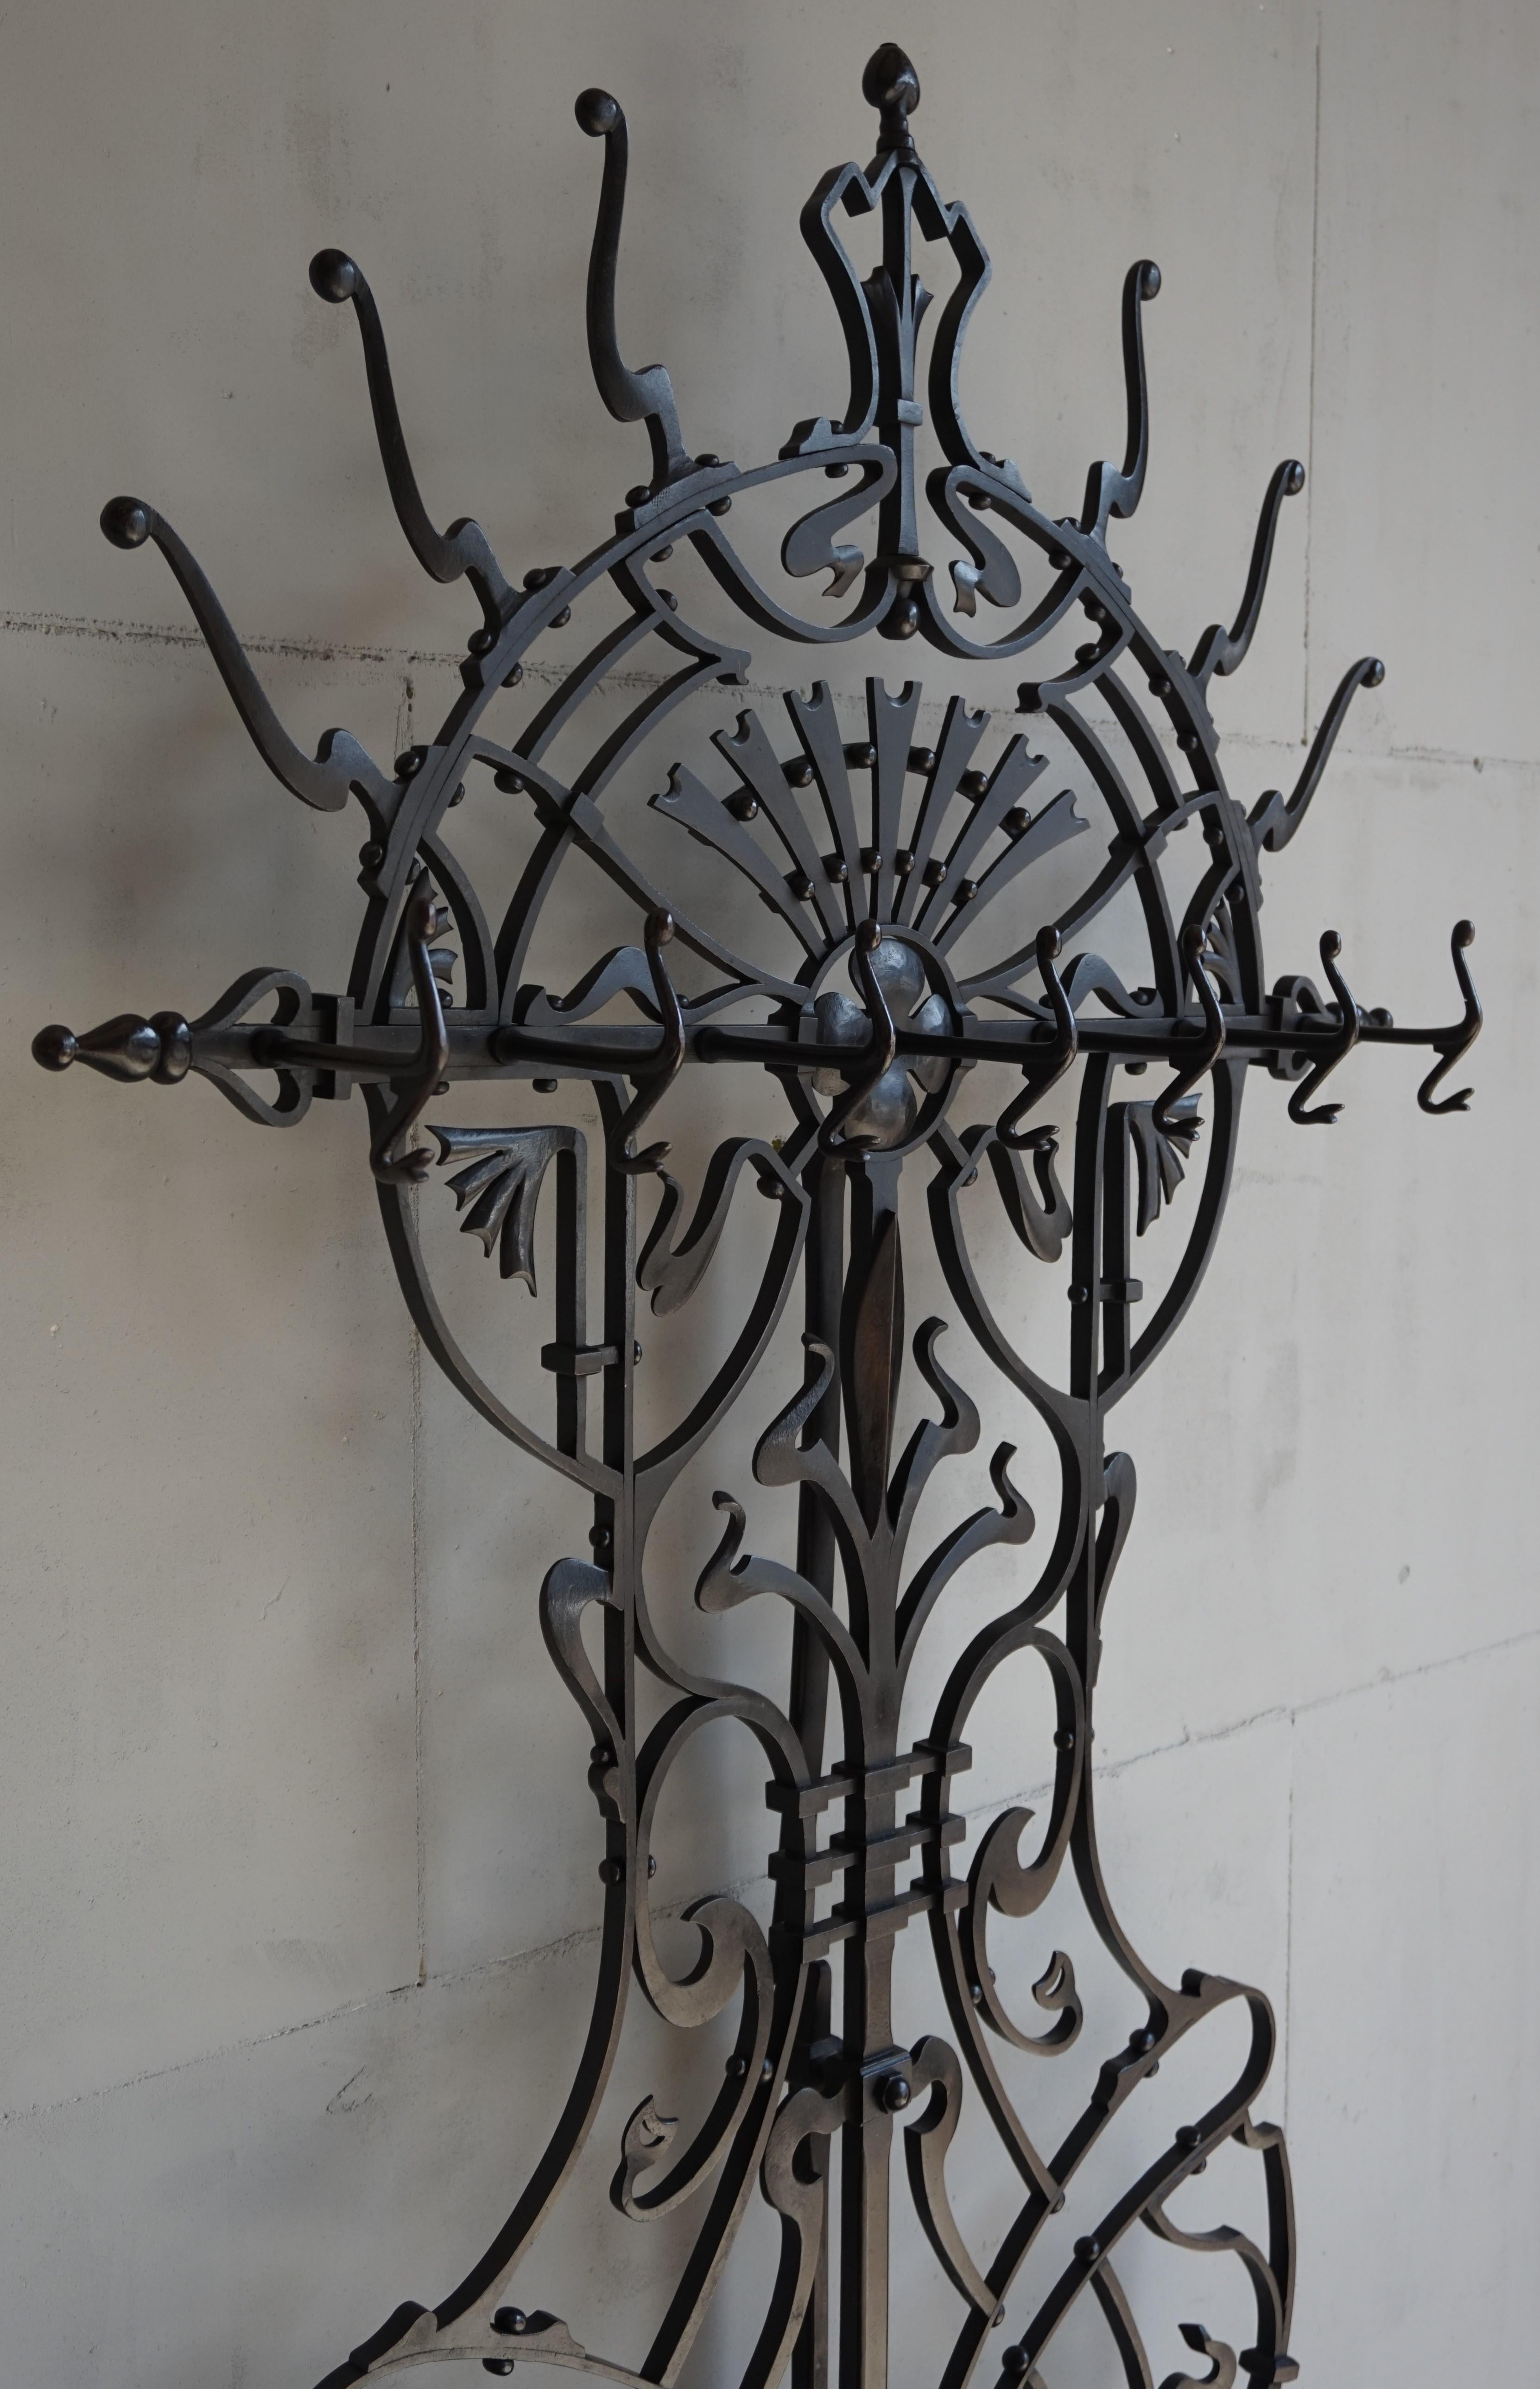 Incredible workmanship antique coat rack & stick stand.

Over the years we have seen and sold a number of unique and top quality antiques made of wrought iron, but this is by far the best we have ever seen. The Arts & Crafts design of this large and